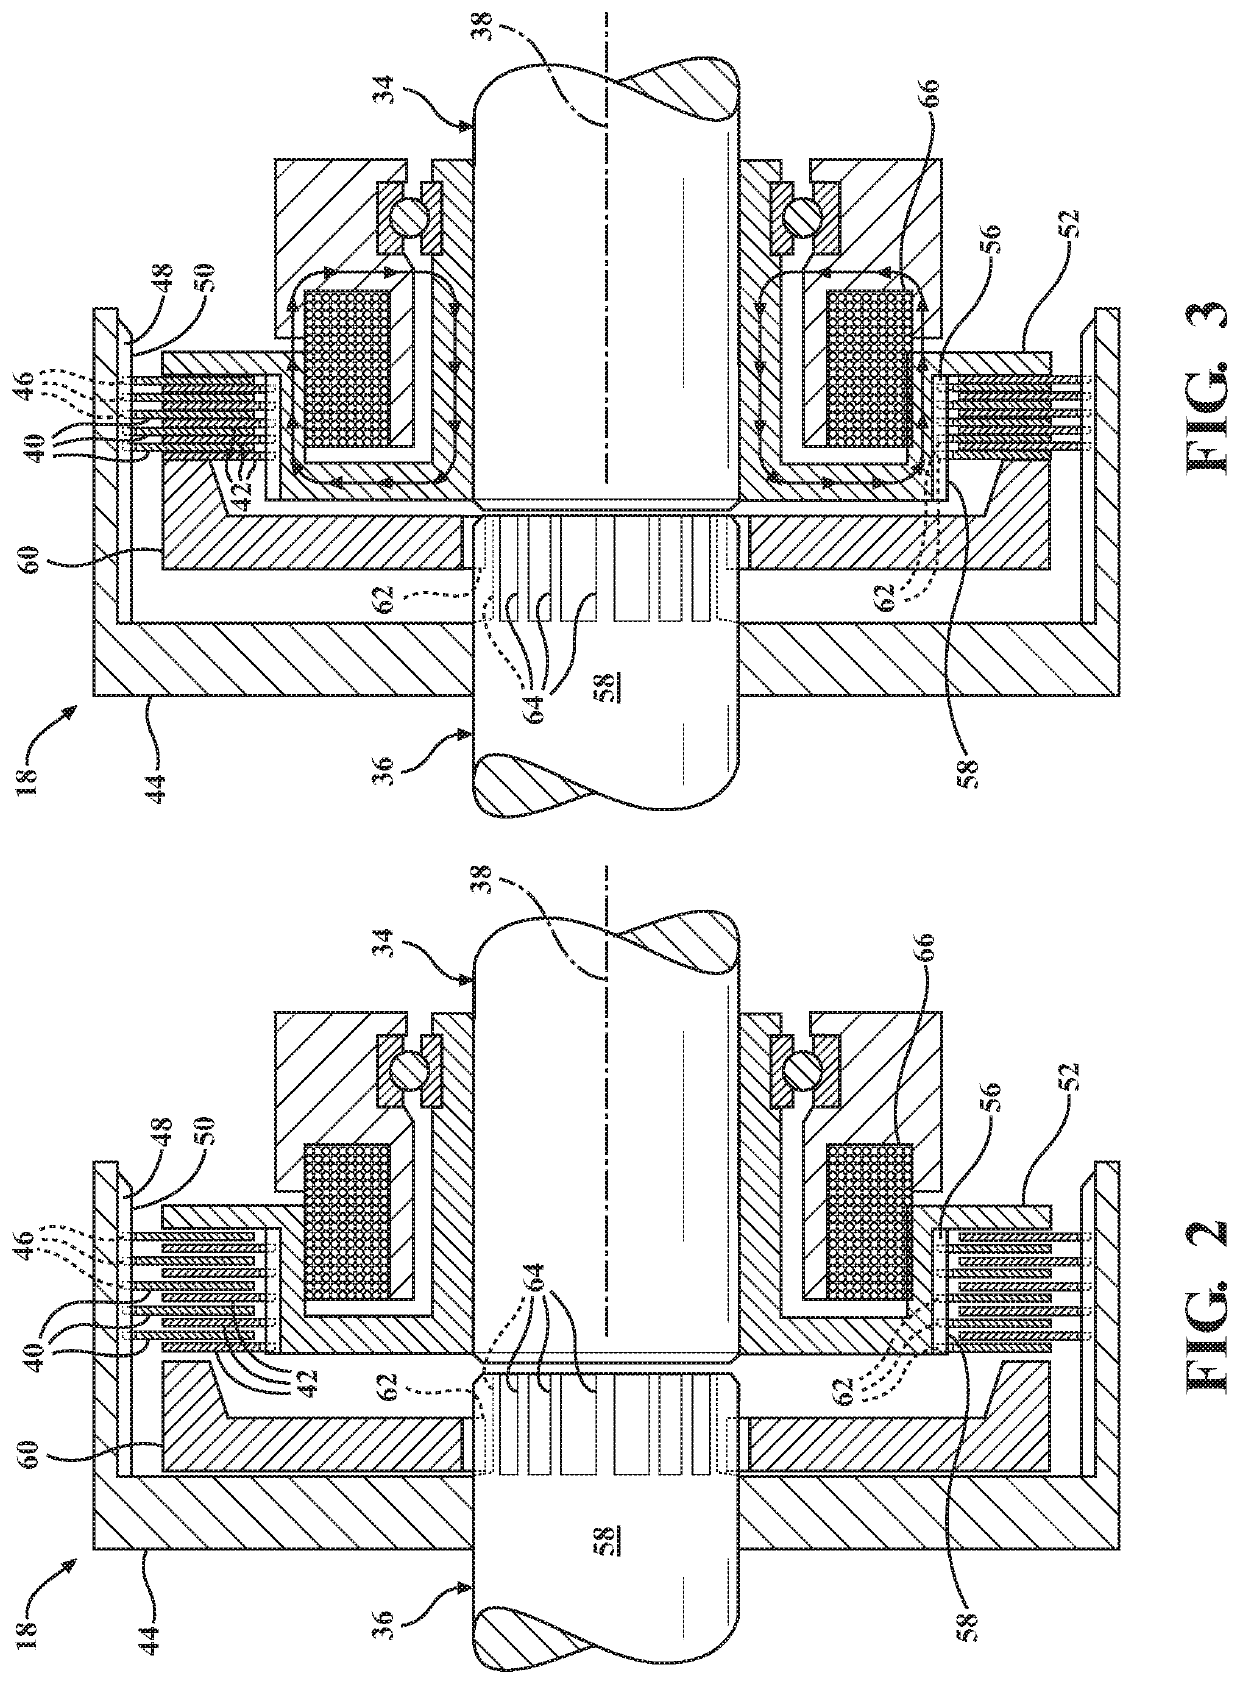 Variable stiffness sway bar for a suspension system of a motor vehicle